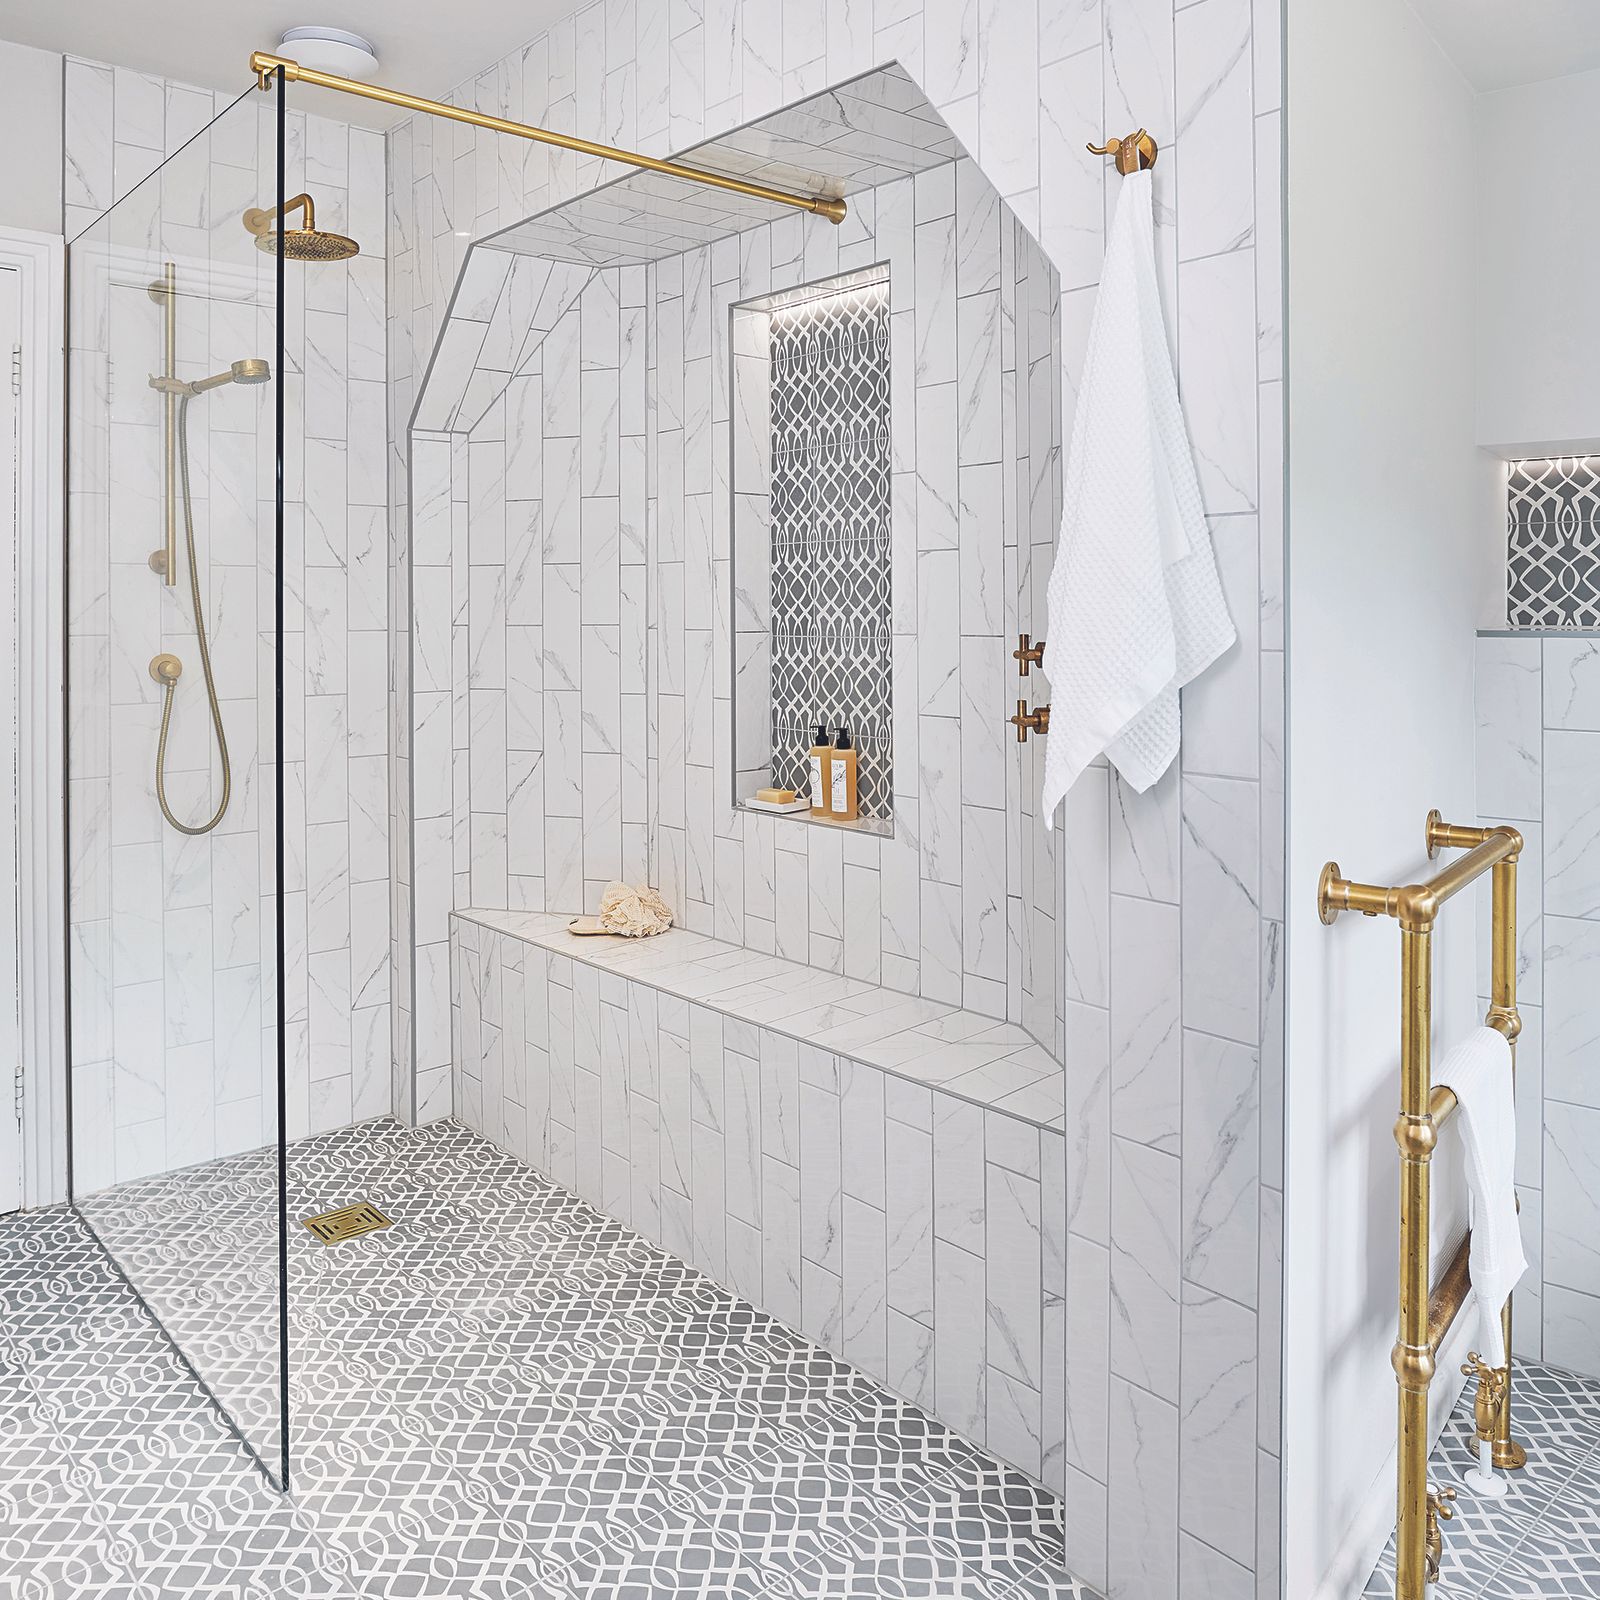 10 Shower tile ideas to add interest to a washroom | Ideal Home